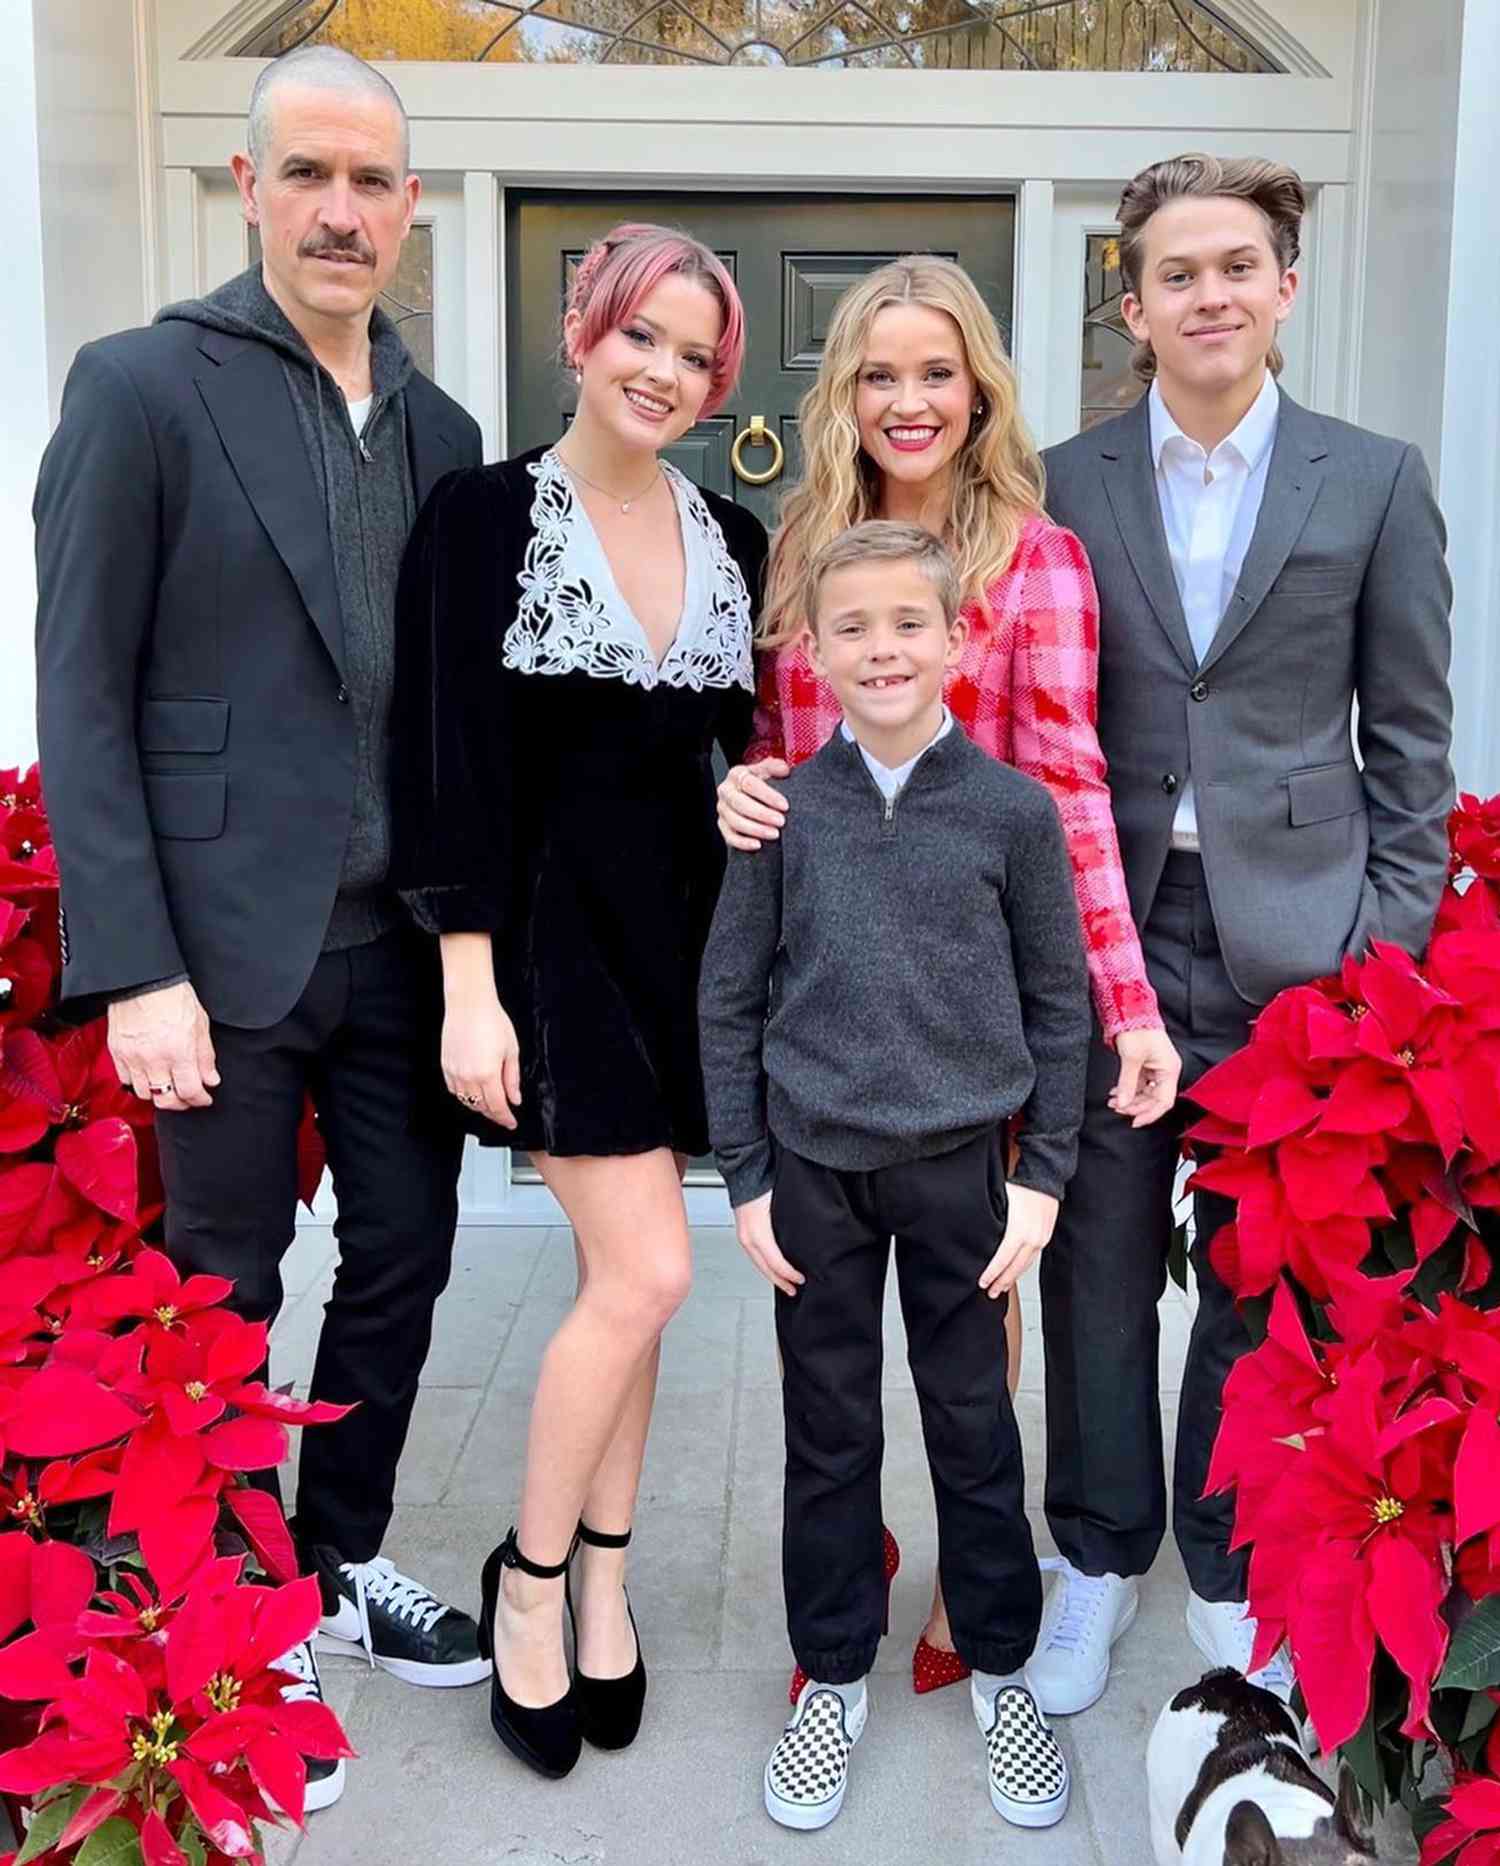 Reese Witherspoon is pictured with her former husband, Jim Toth, and her children.